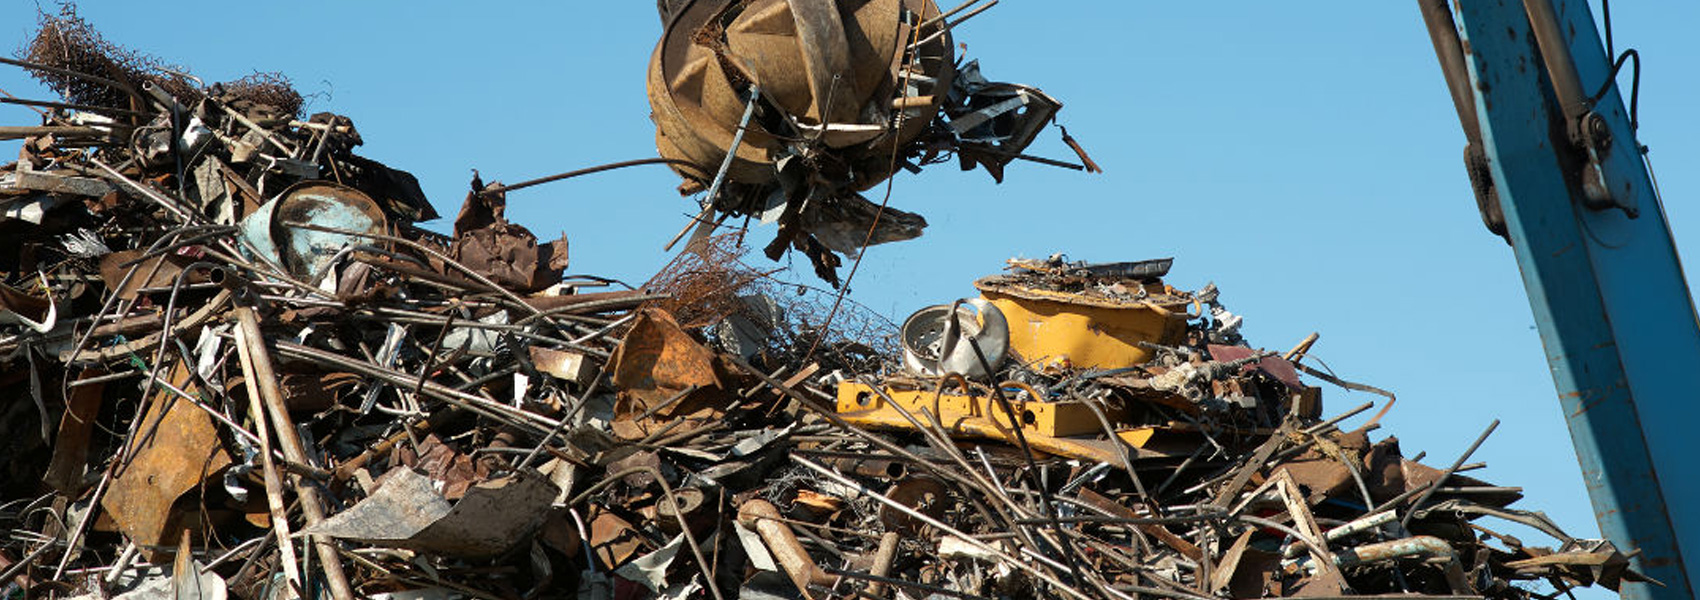 Different Ways Scrap Metal Is Re-Used To Form A Better World